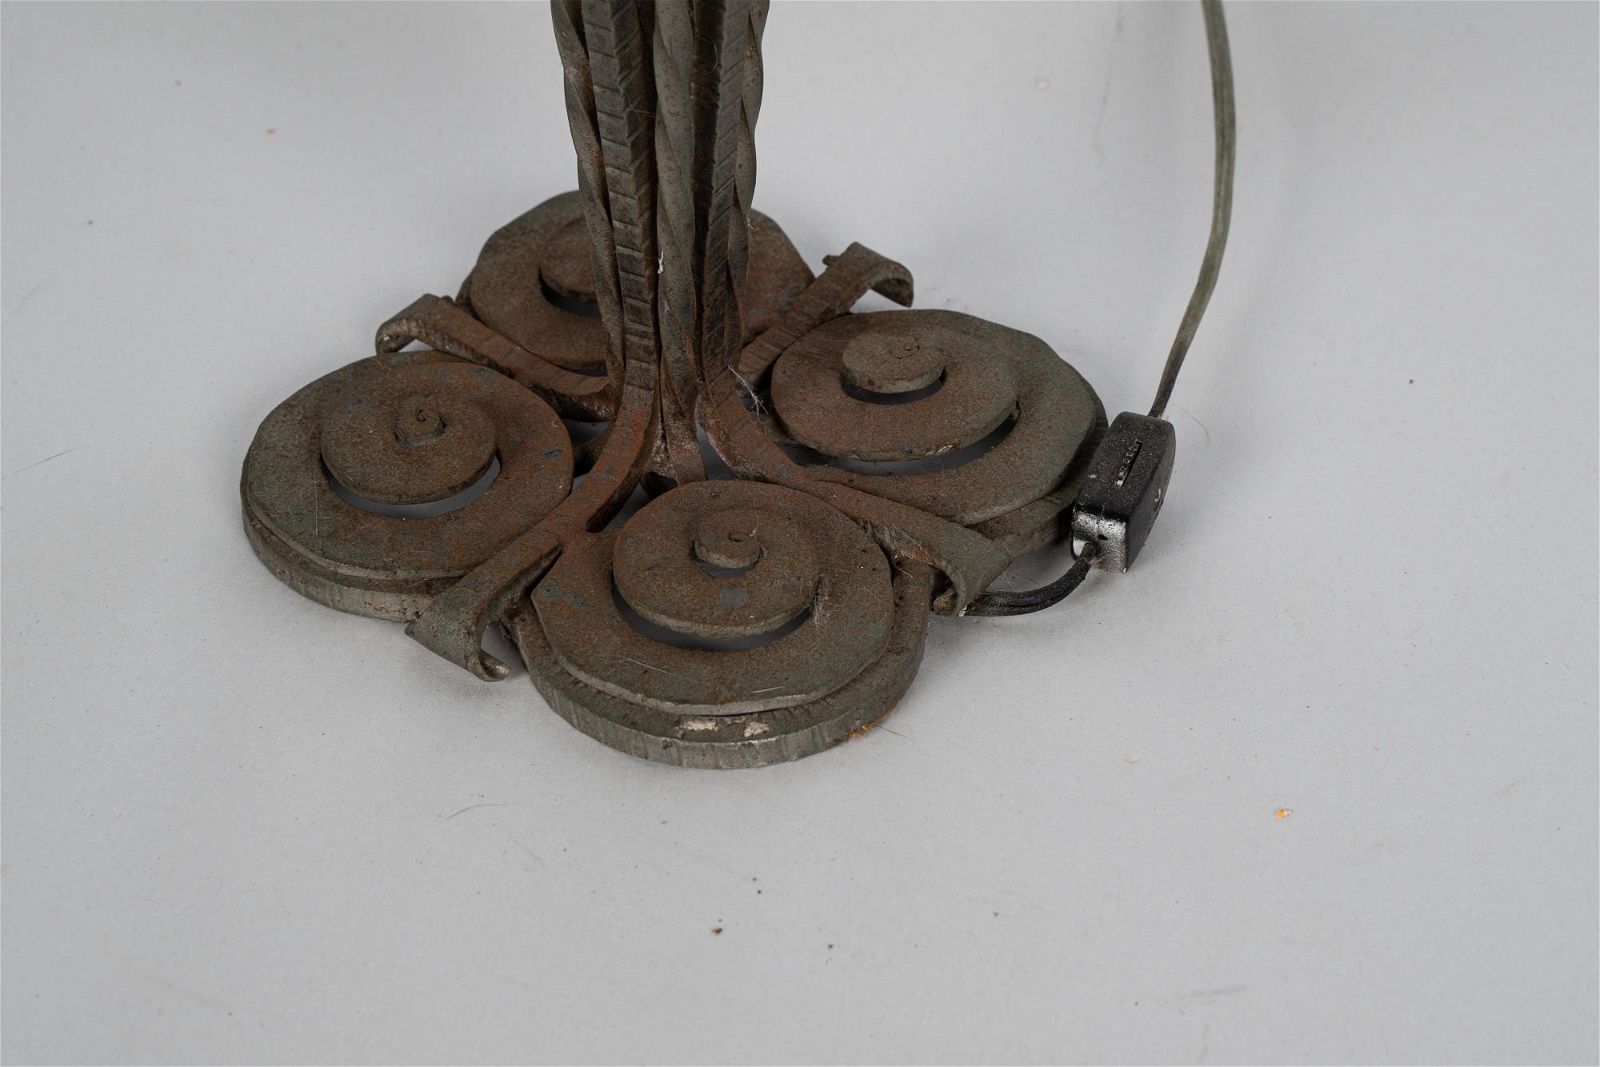 AL2-012: EARLY 20TH CENTURY FRENCH ART DECO HAND FORGED WROUGHT IRON LAMP